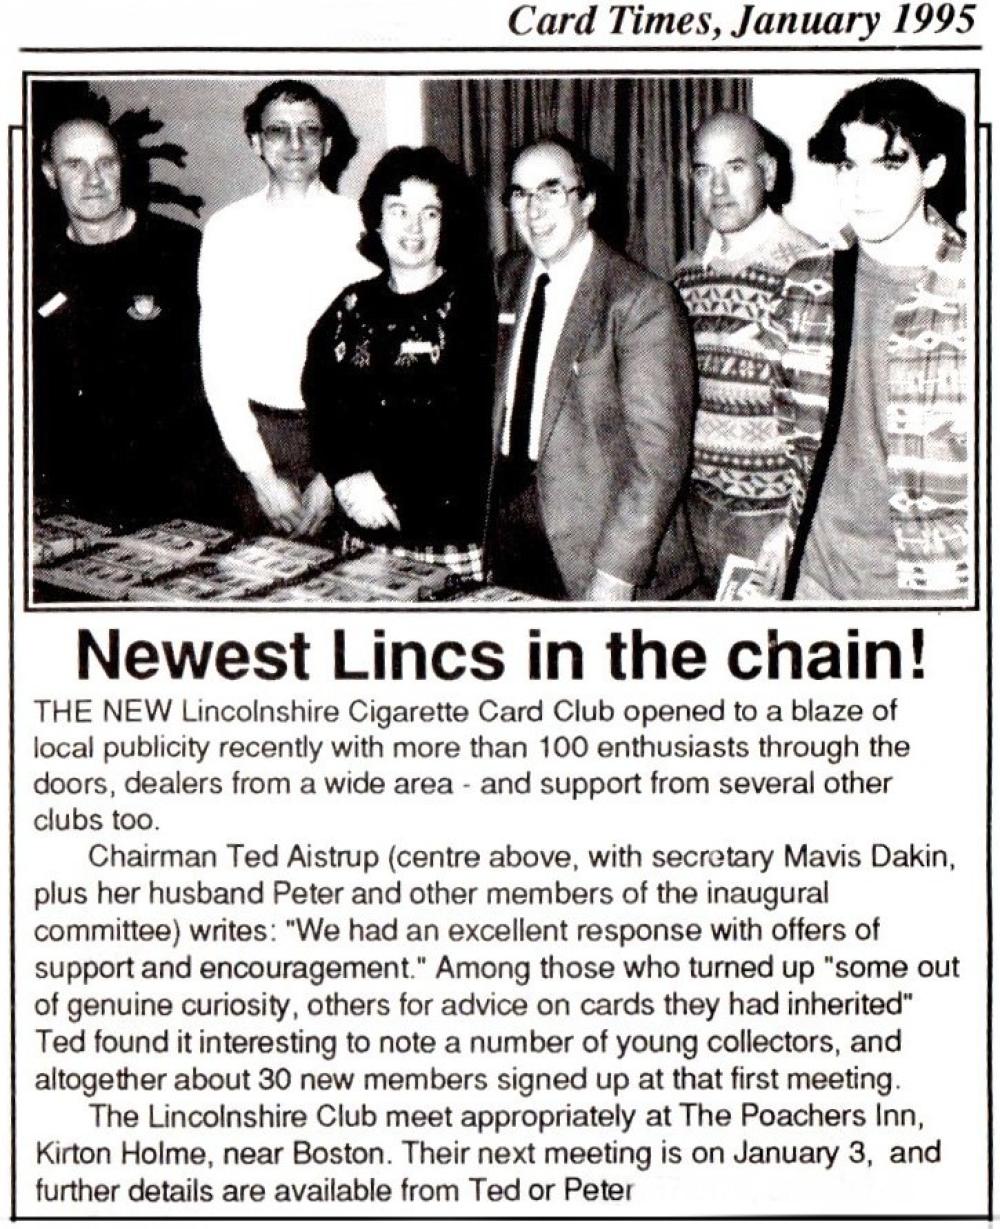 lincolnshire first press report